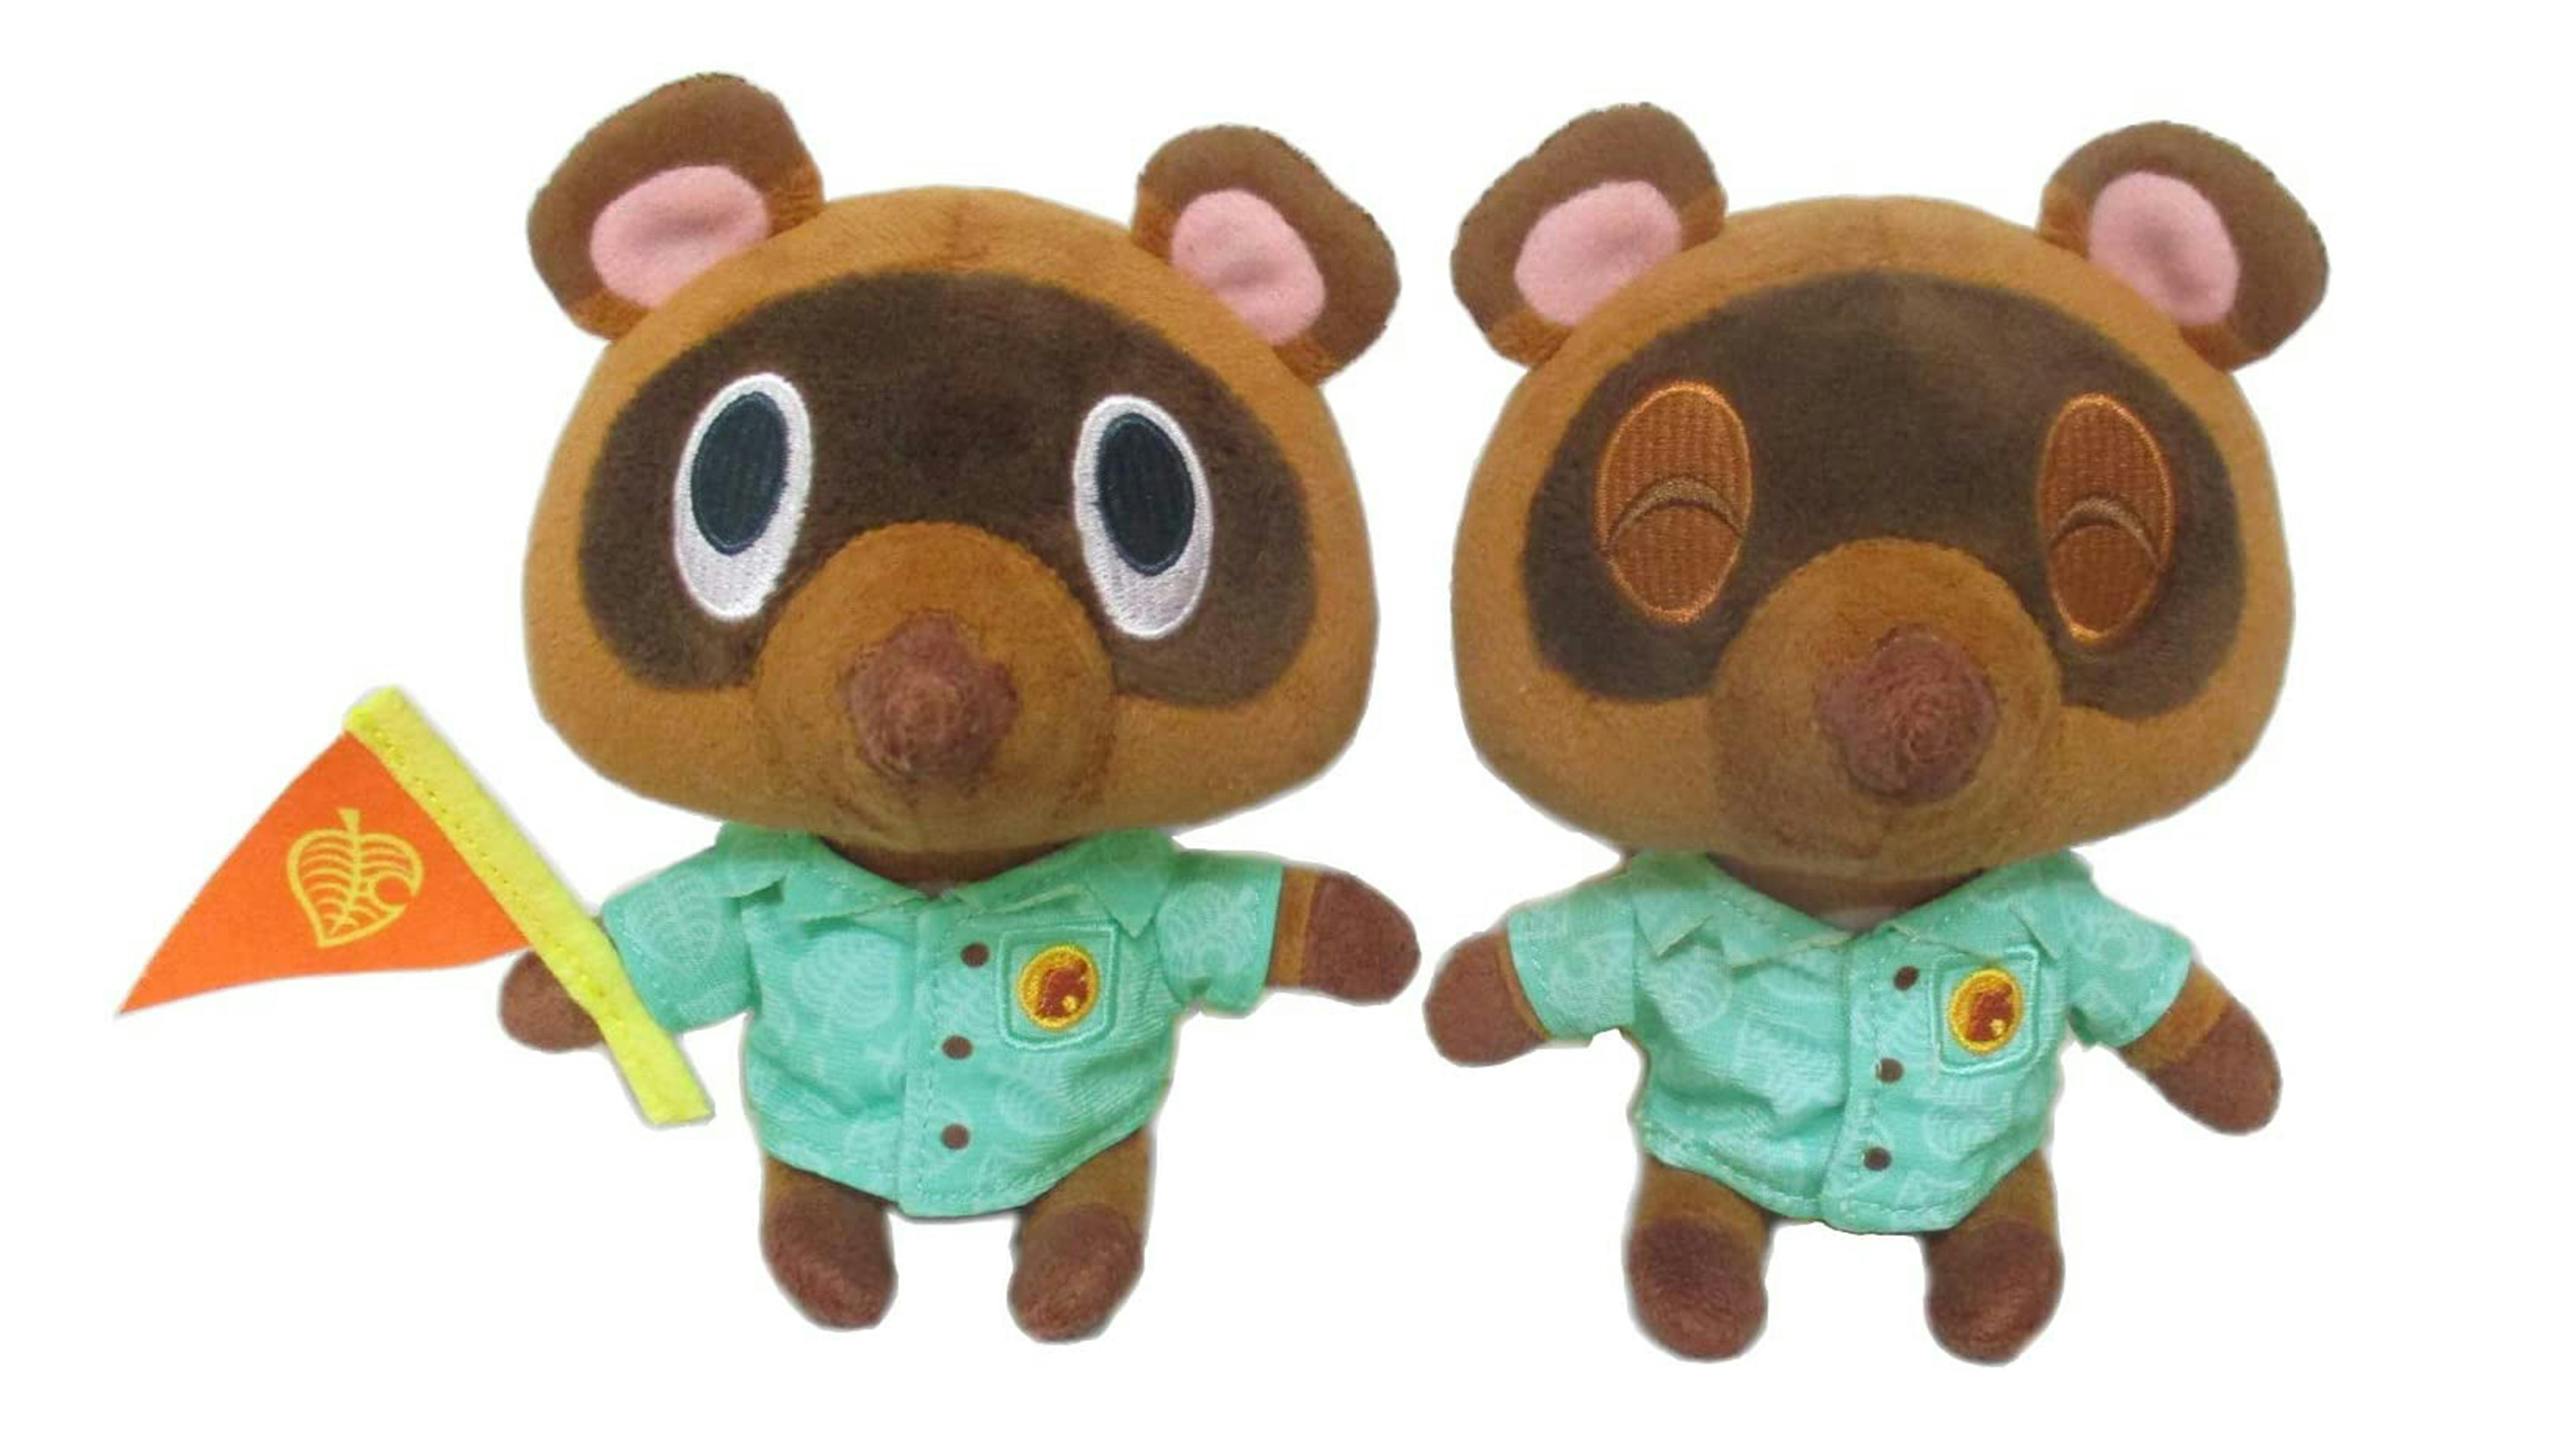 Little Buddy Animal Crossing Plush Timmy and Tommy product image.